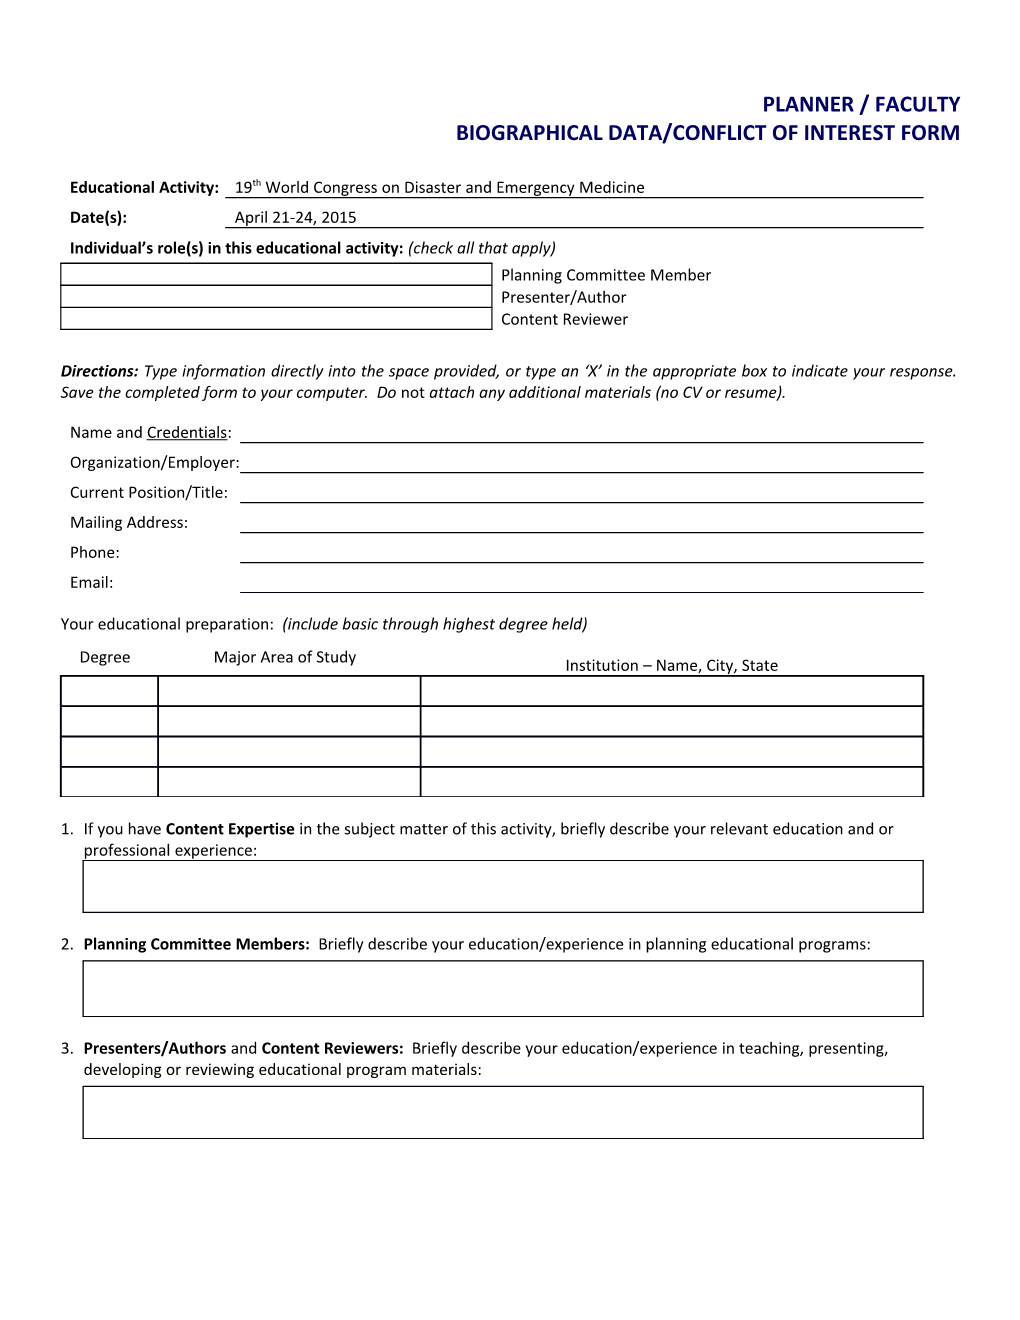 Biographical Data/Conflict of Interest Form